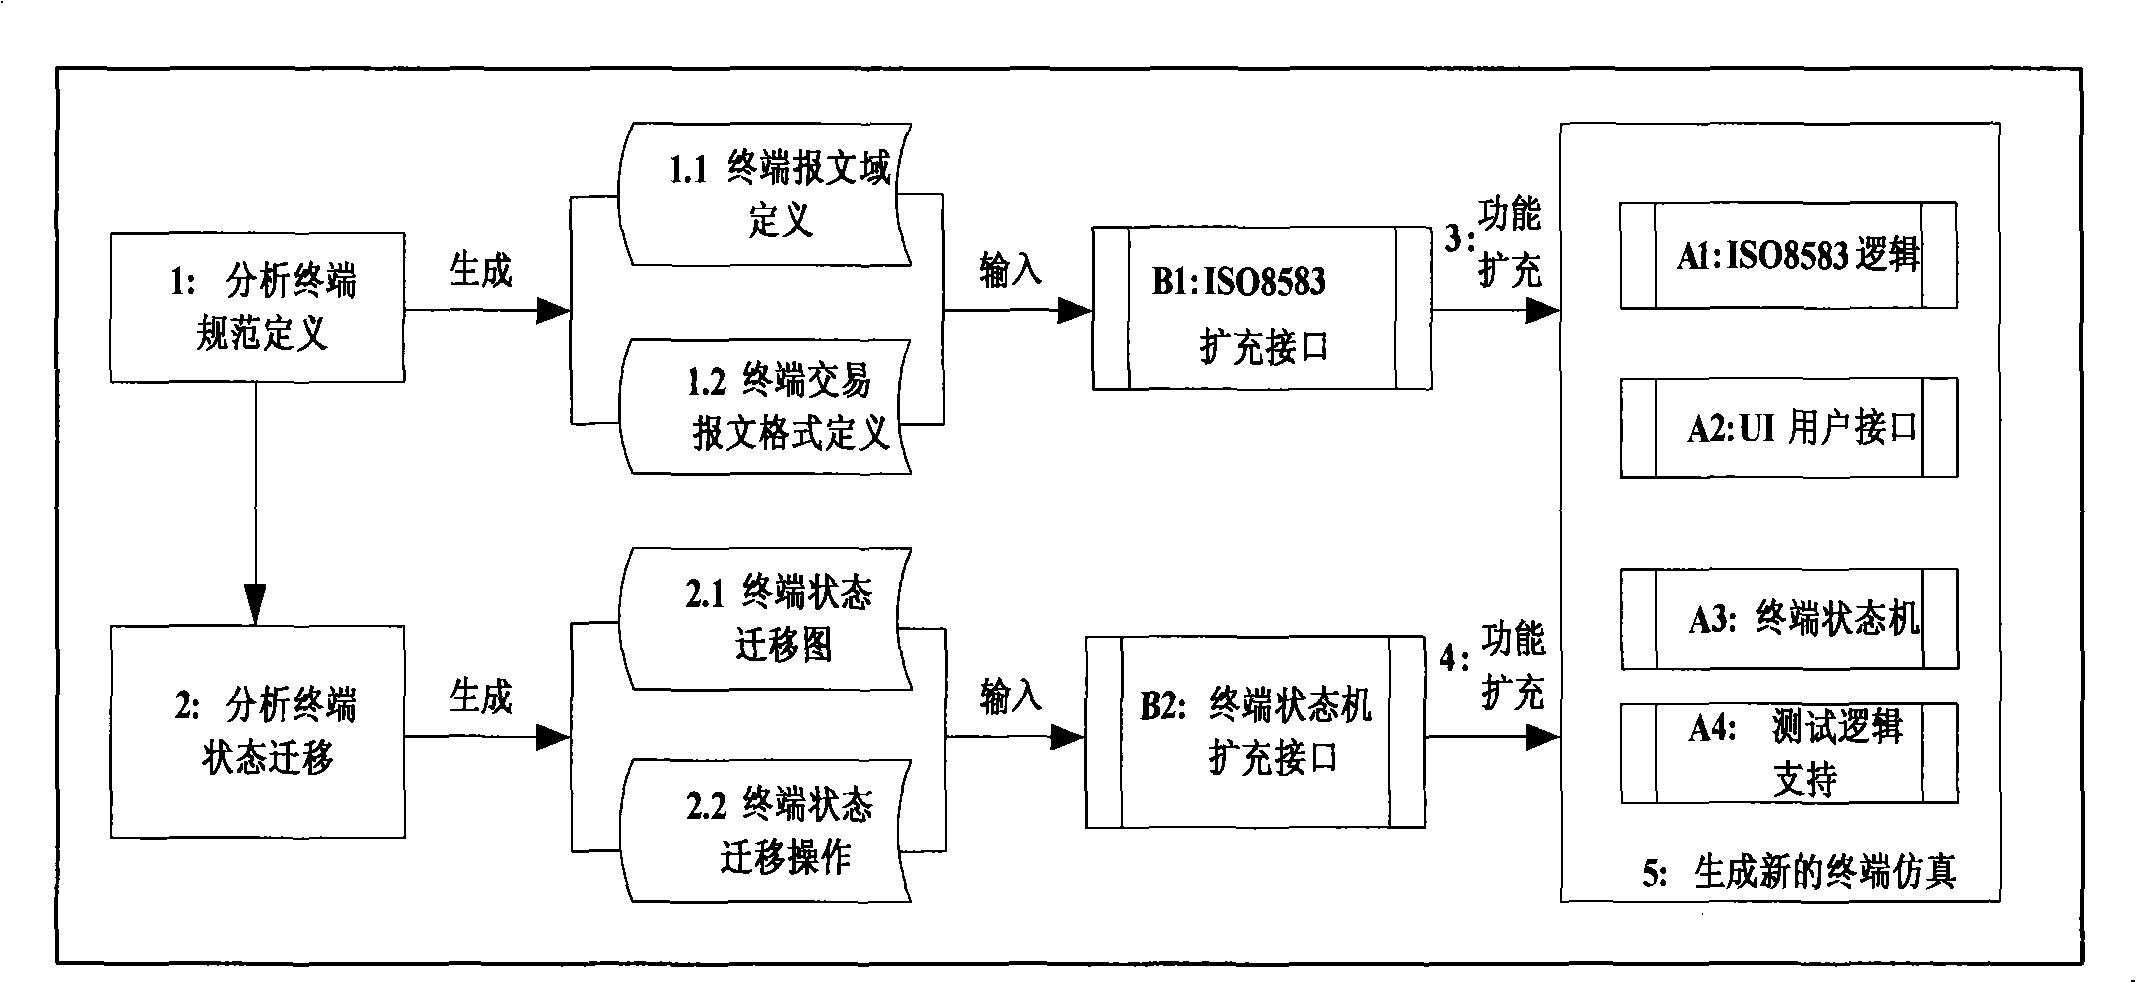 Simulated testing system and method for expanding system by the same system